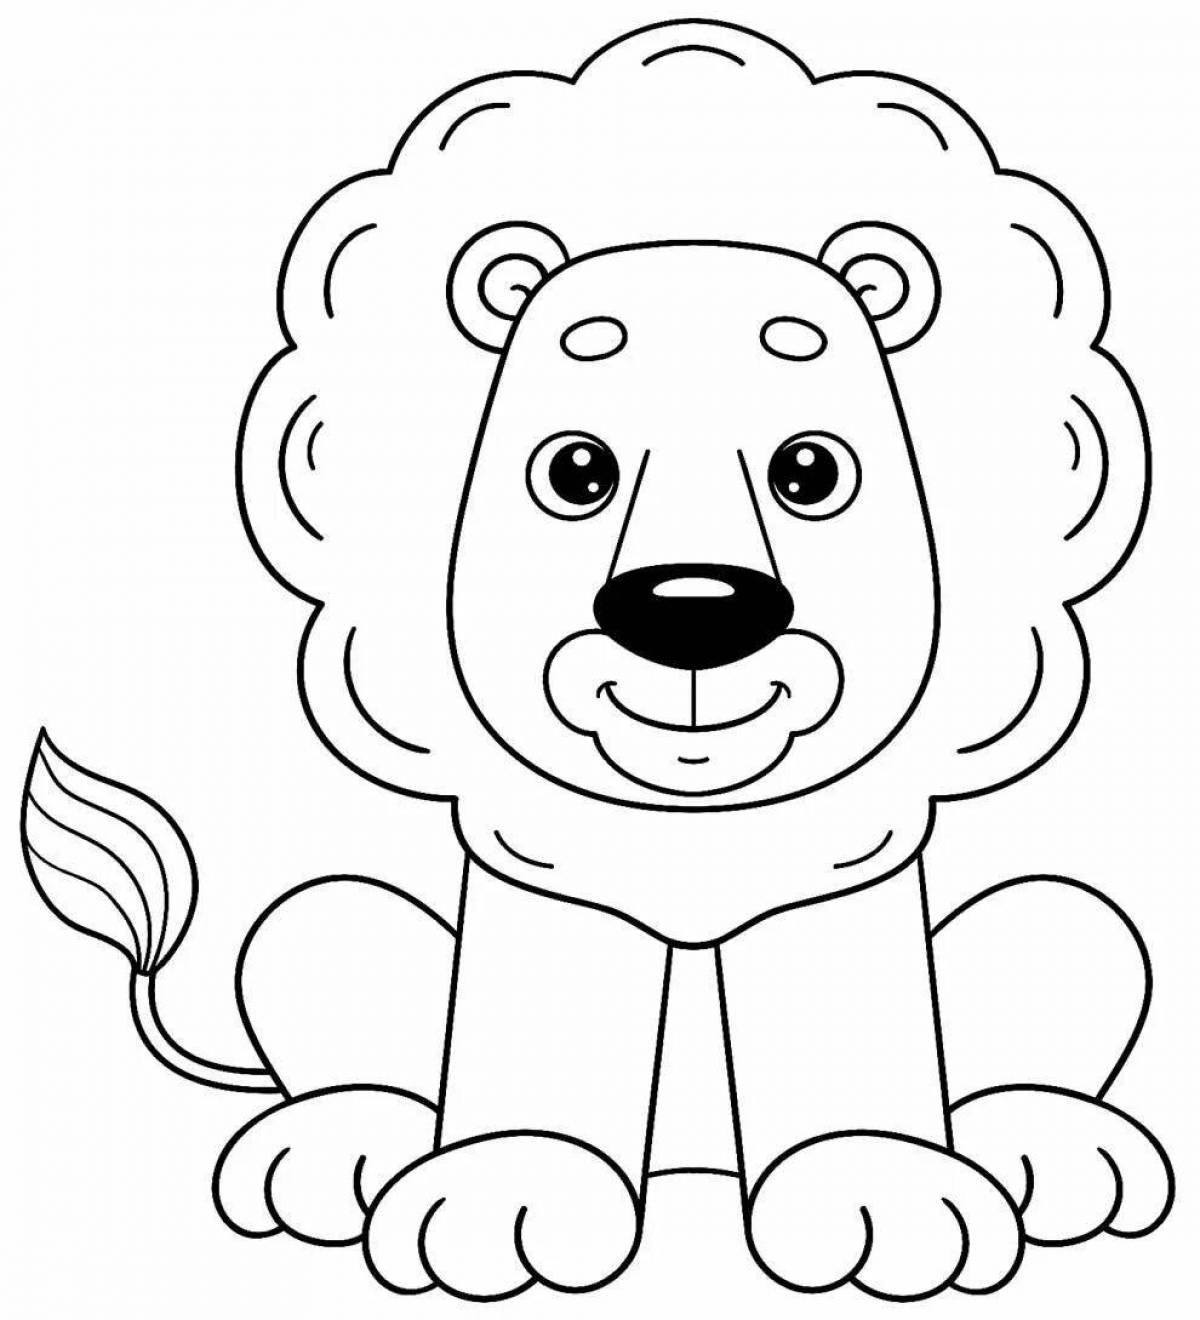 Fancy lion coloring book for 3-4 year olds